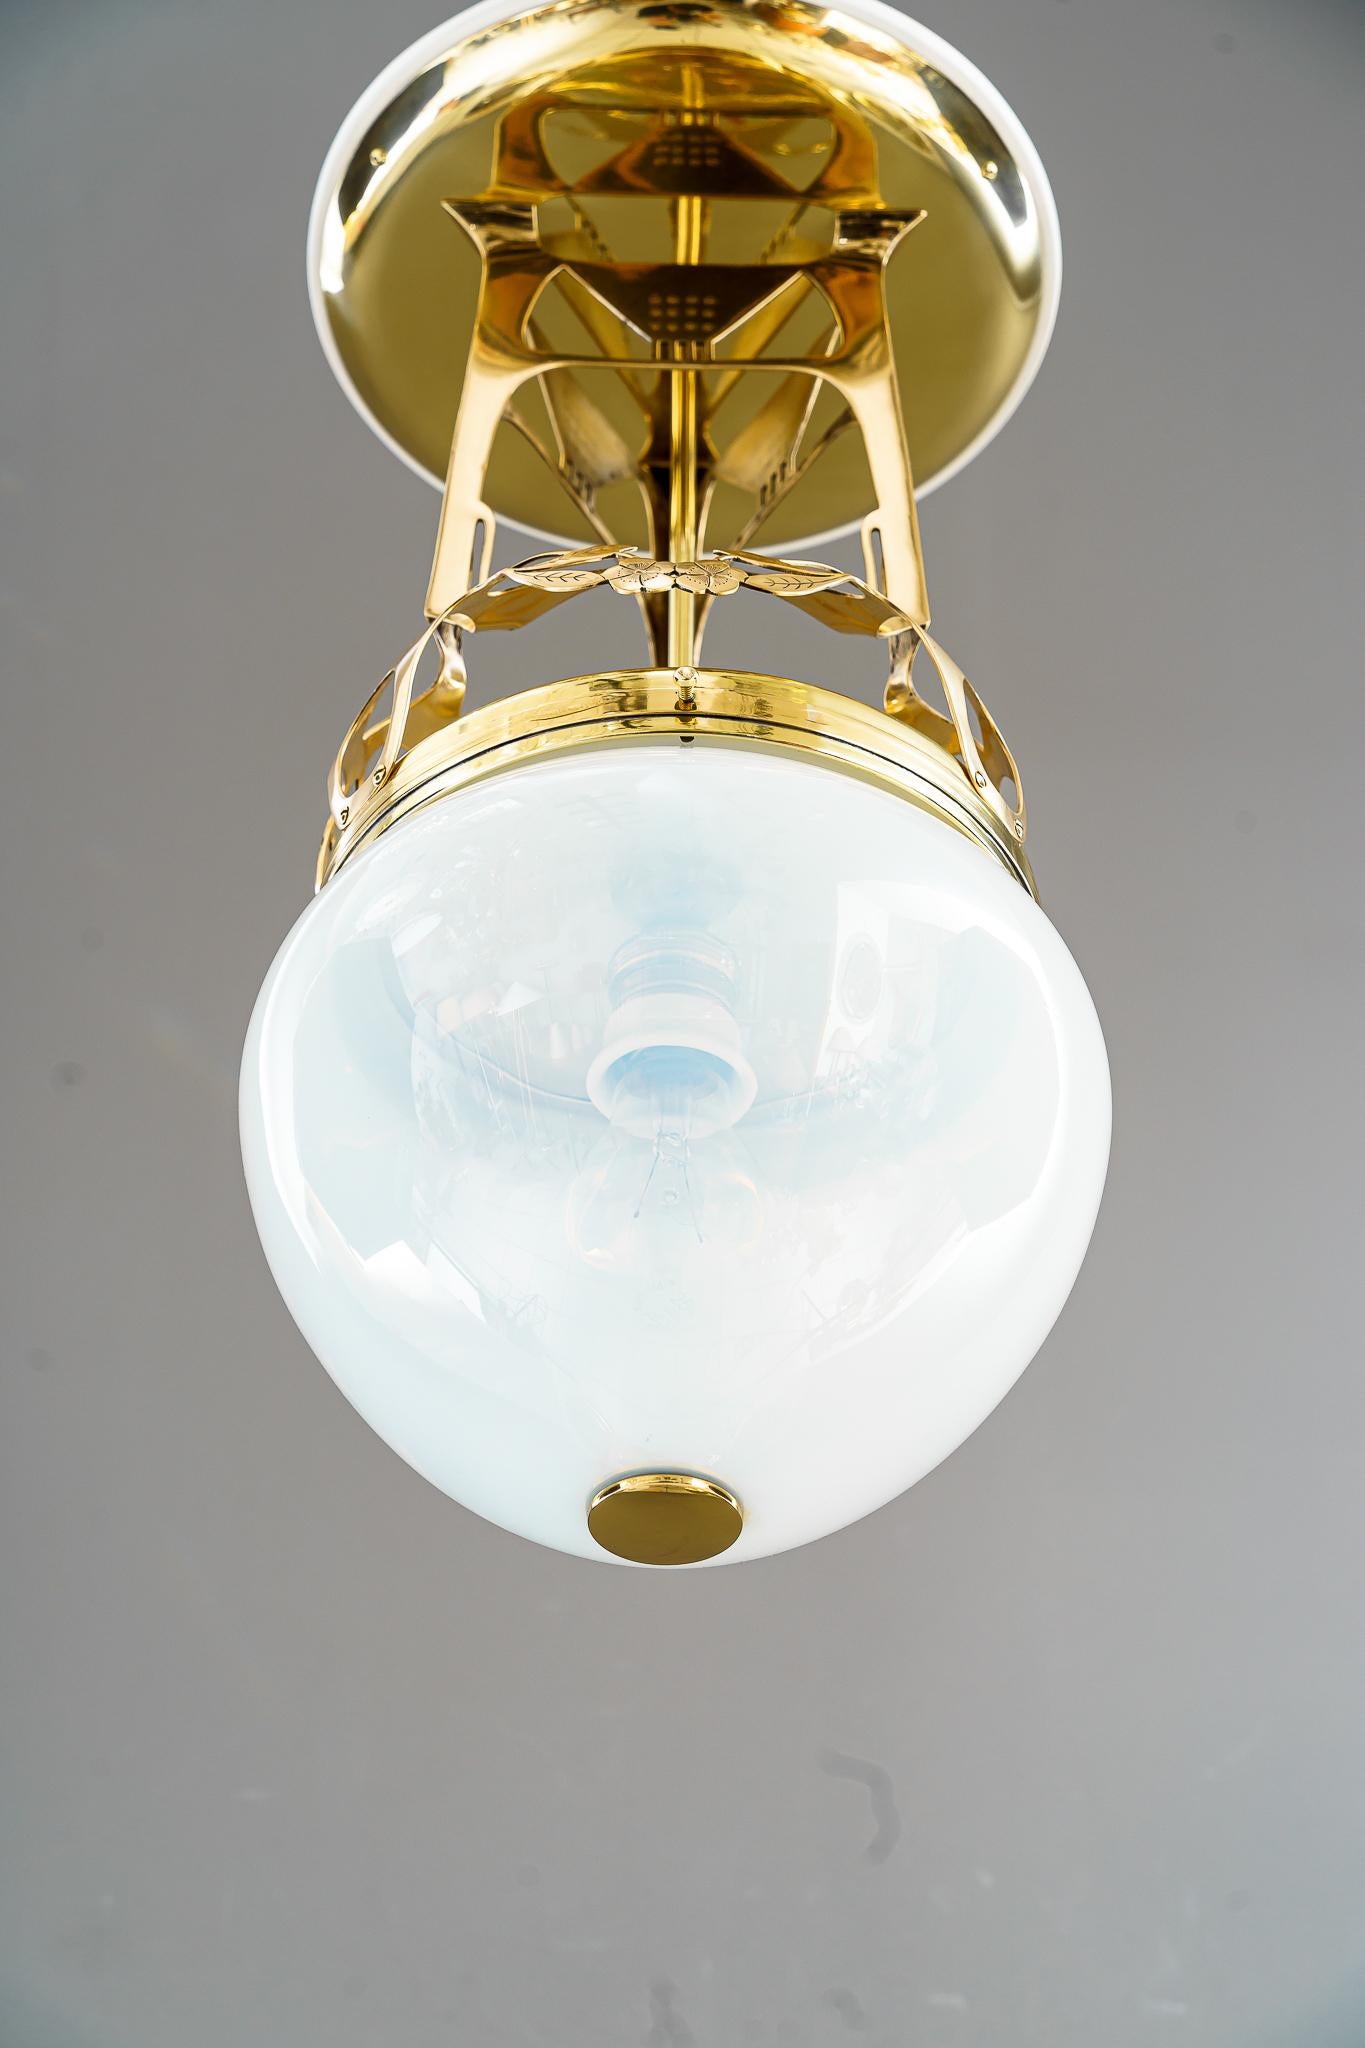 Early 20th Century Art Deco Ceiling Lamp with Original Opaline Glass Shade, Vienna, Around 1920s